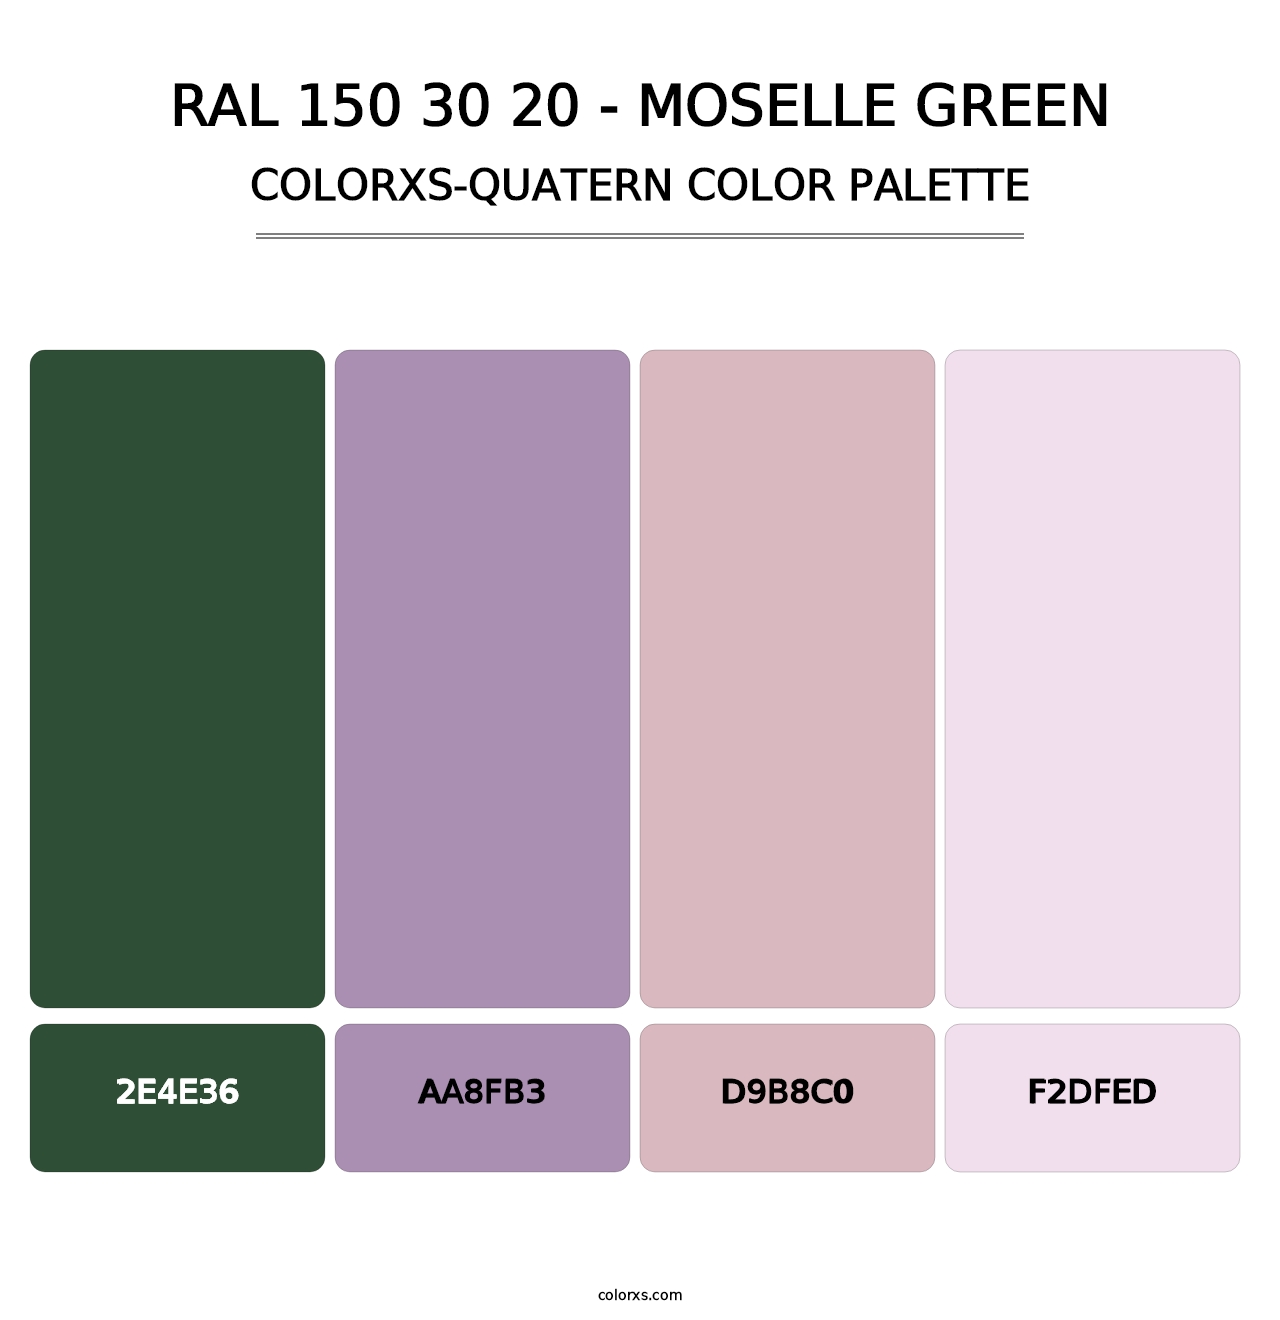 RAL 150 30 20 - Moselle Green - Colorxs Quatern Palette